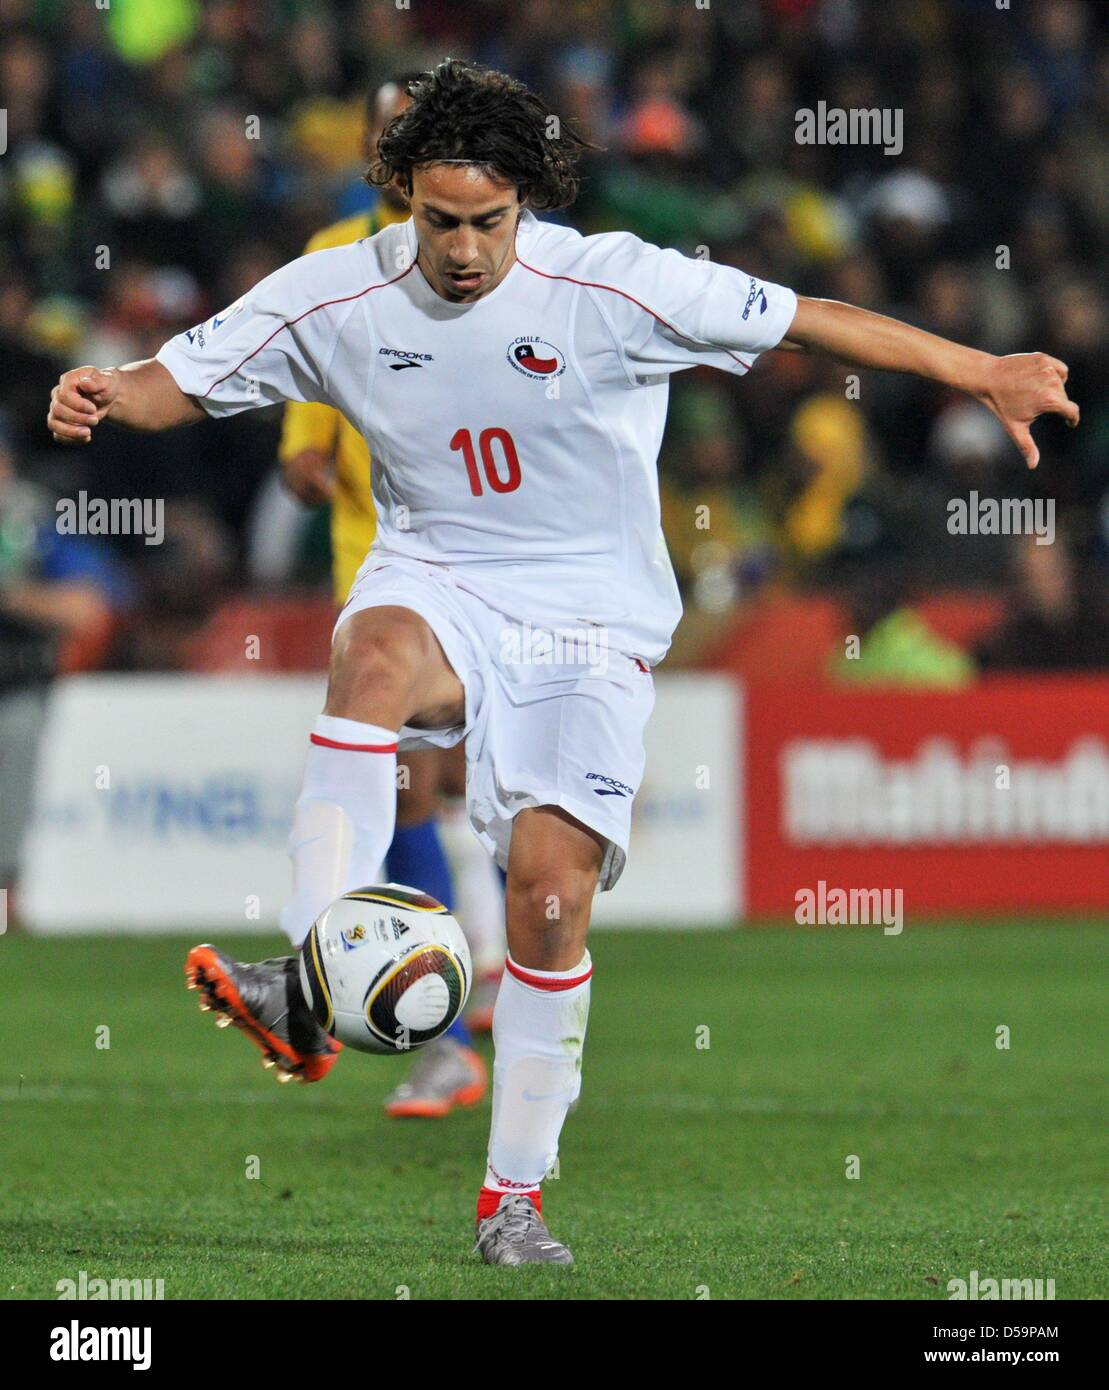 Jorge Valdivia of Chile controls the ball during the 2010 FIFA World Cup Round of Sixteen match between Brazil and Chile at the Ellis Park Stadium in Johannesburg, South Africa 28 June 2010. Photo: Bernd Weissbrod dpa - Please refer to http://dpaq.de/FIFA-WM2010-TC Stock Photo